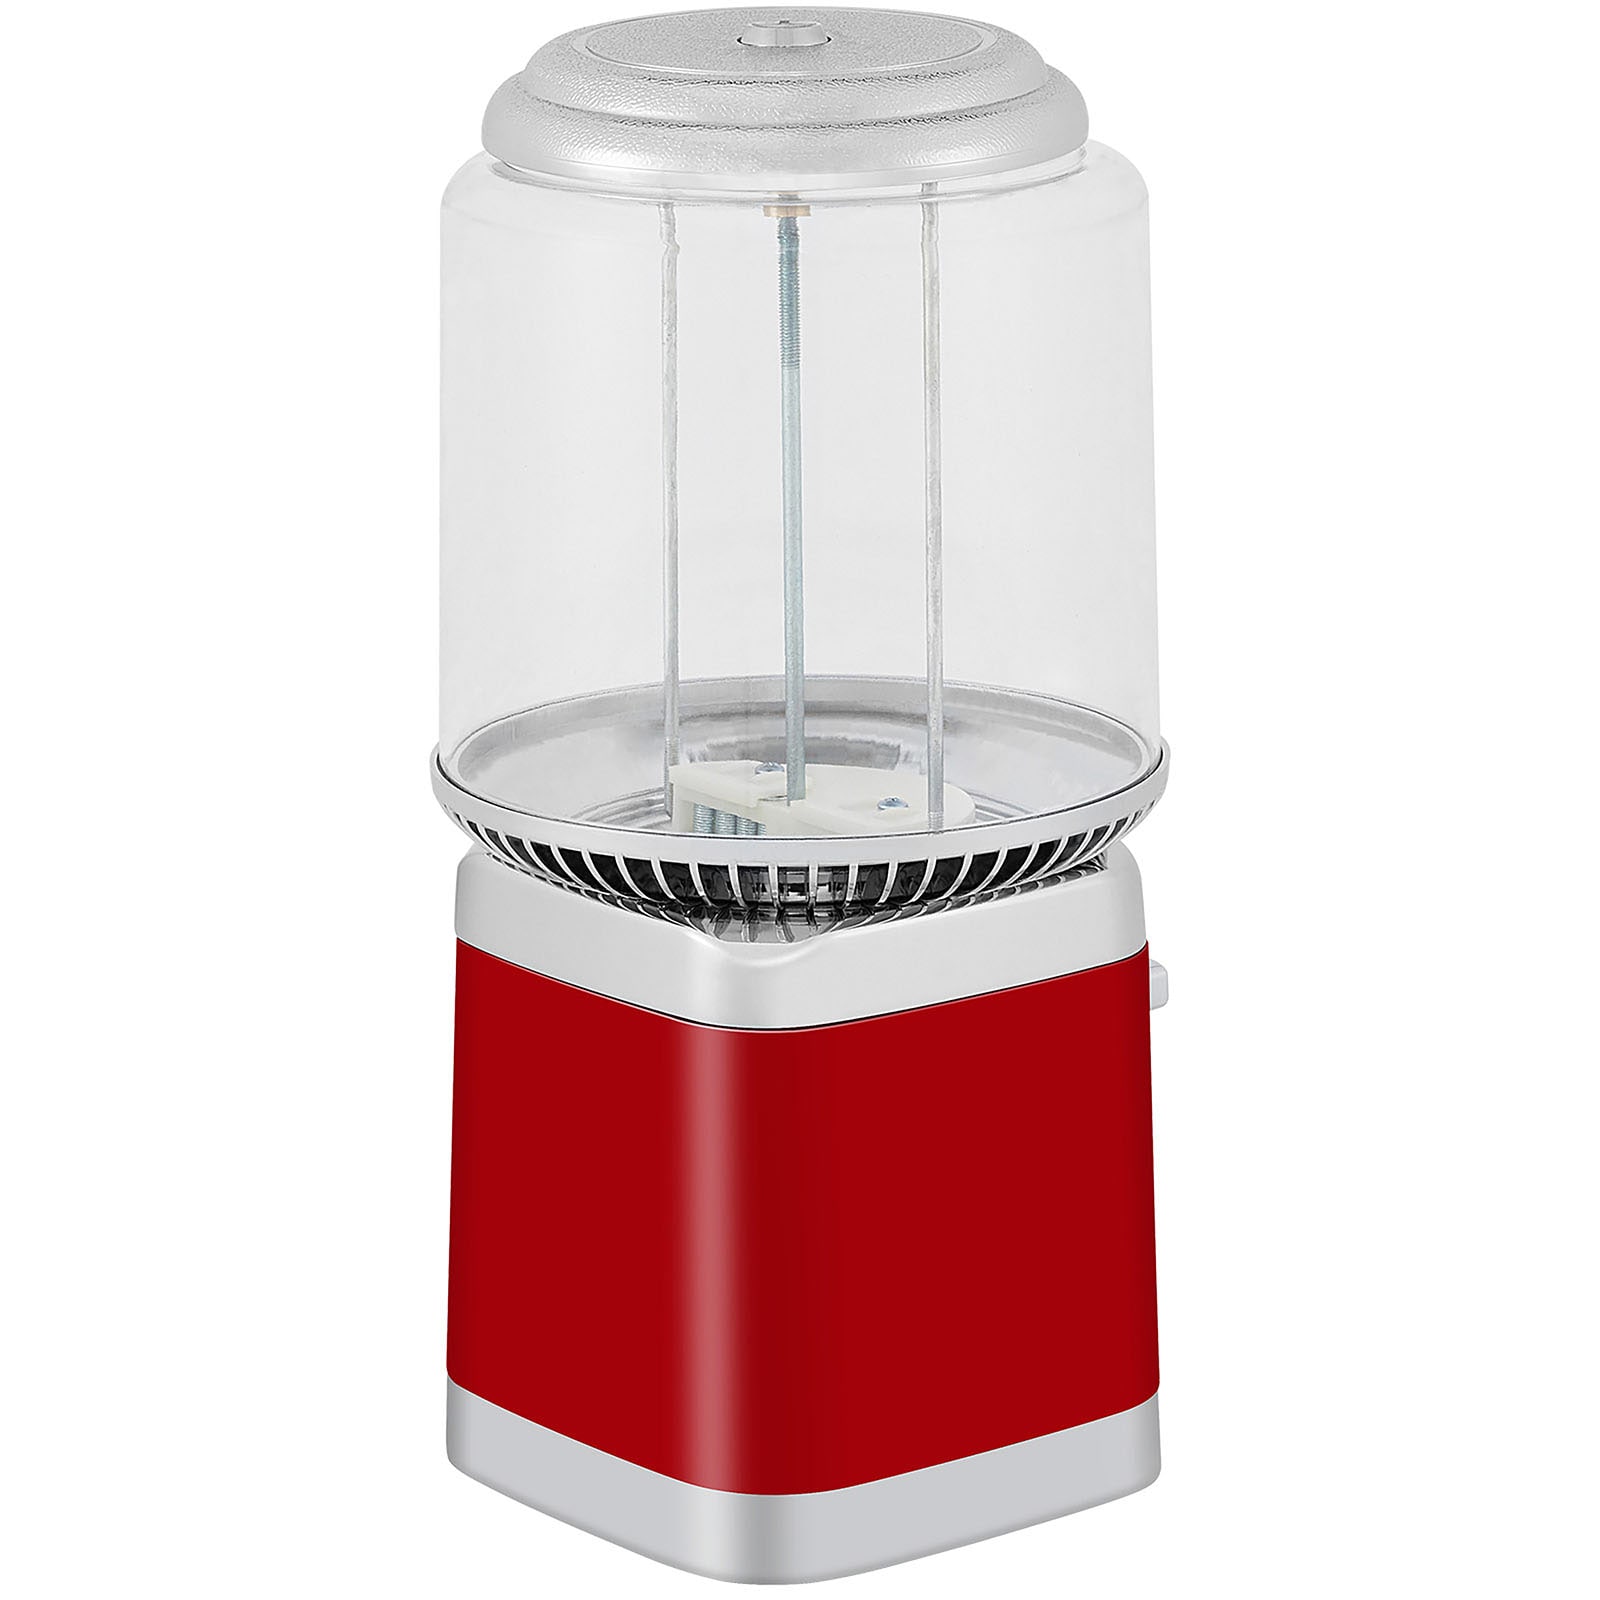 VEVOR 0.7-1.3 INCH Gumball Machine - Red, Commercial/Residential